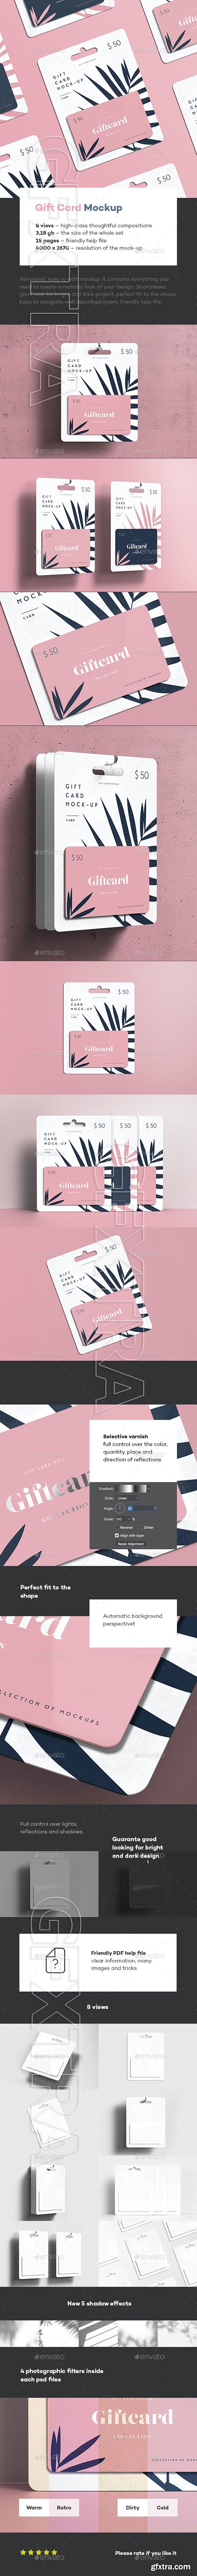 GraphicRiver - Gift Card Mock-up 29702230